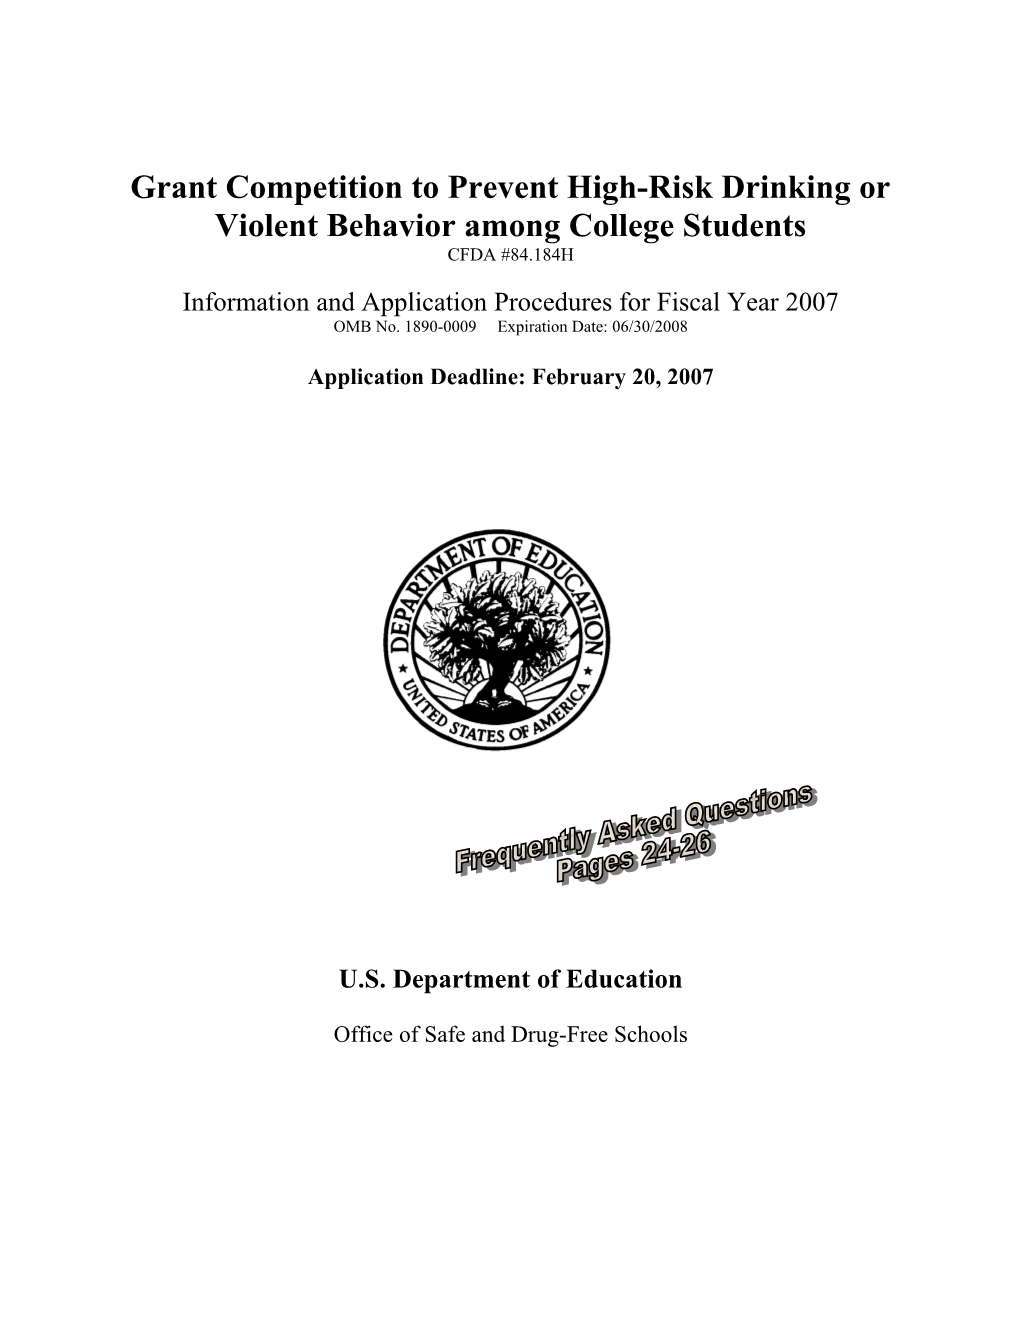 Grant Competition to Prevent High-Risk Drinking Or Violent Behavior Among College Students